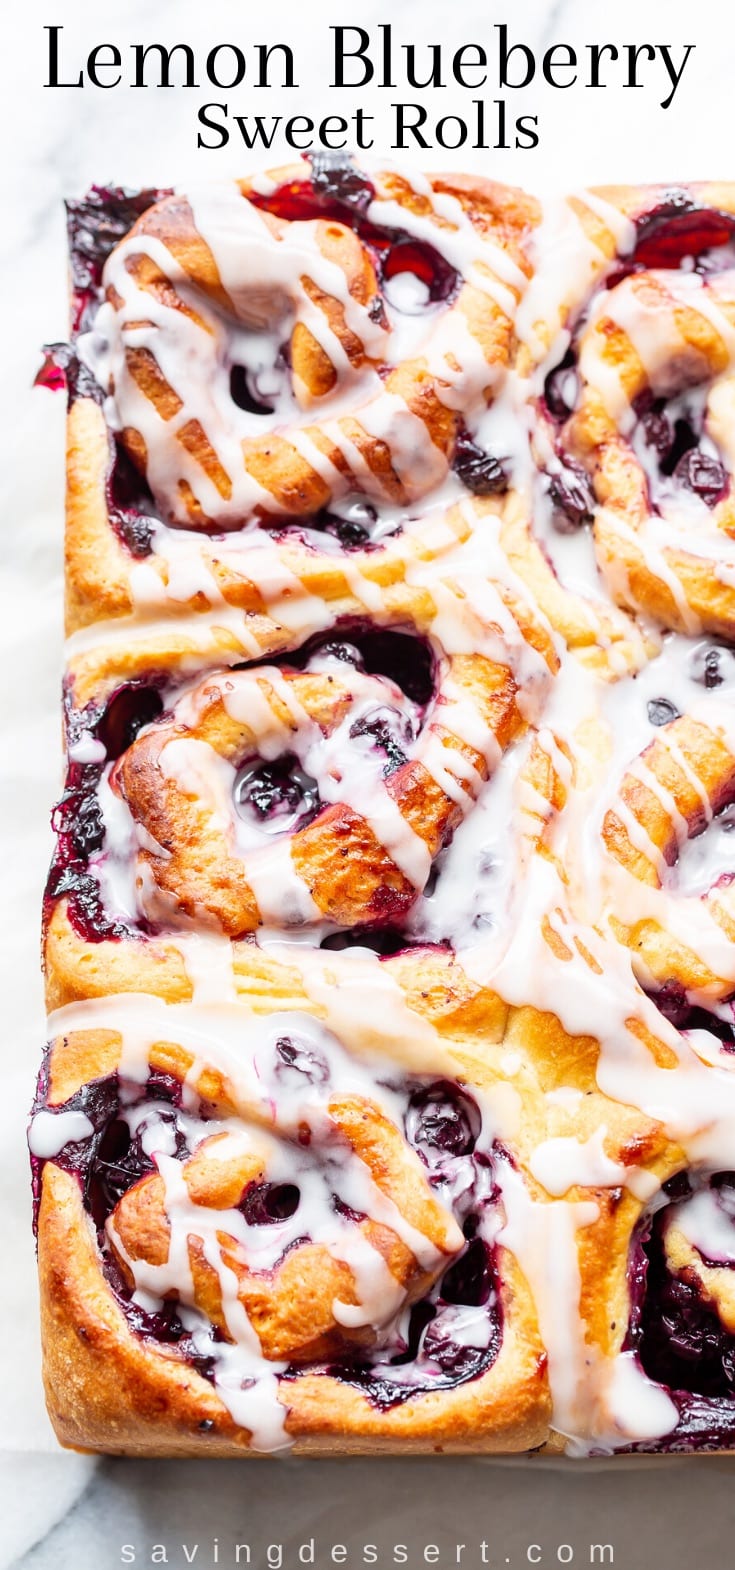 An overhead view of baked sweet rolls with blueberries and a simple drizzled glaze